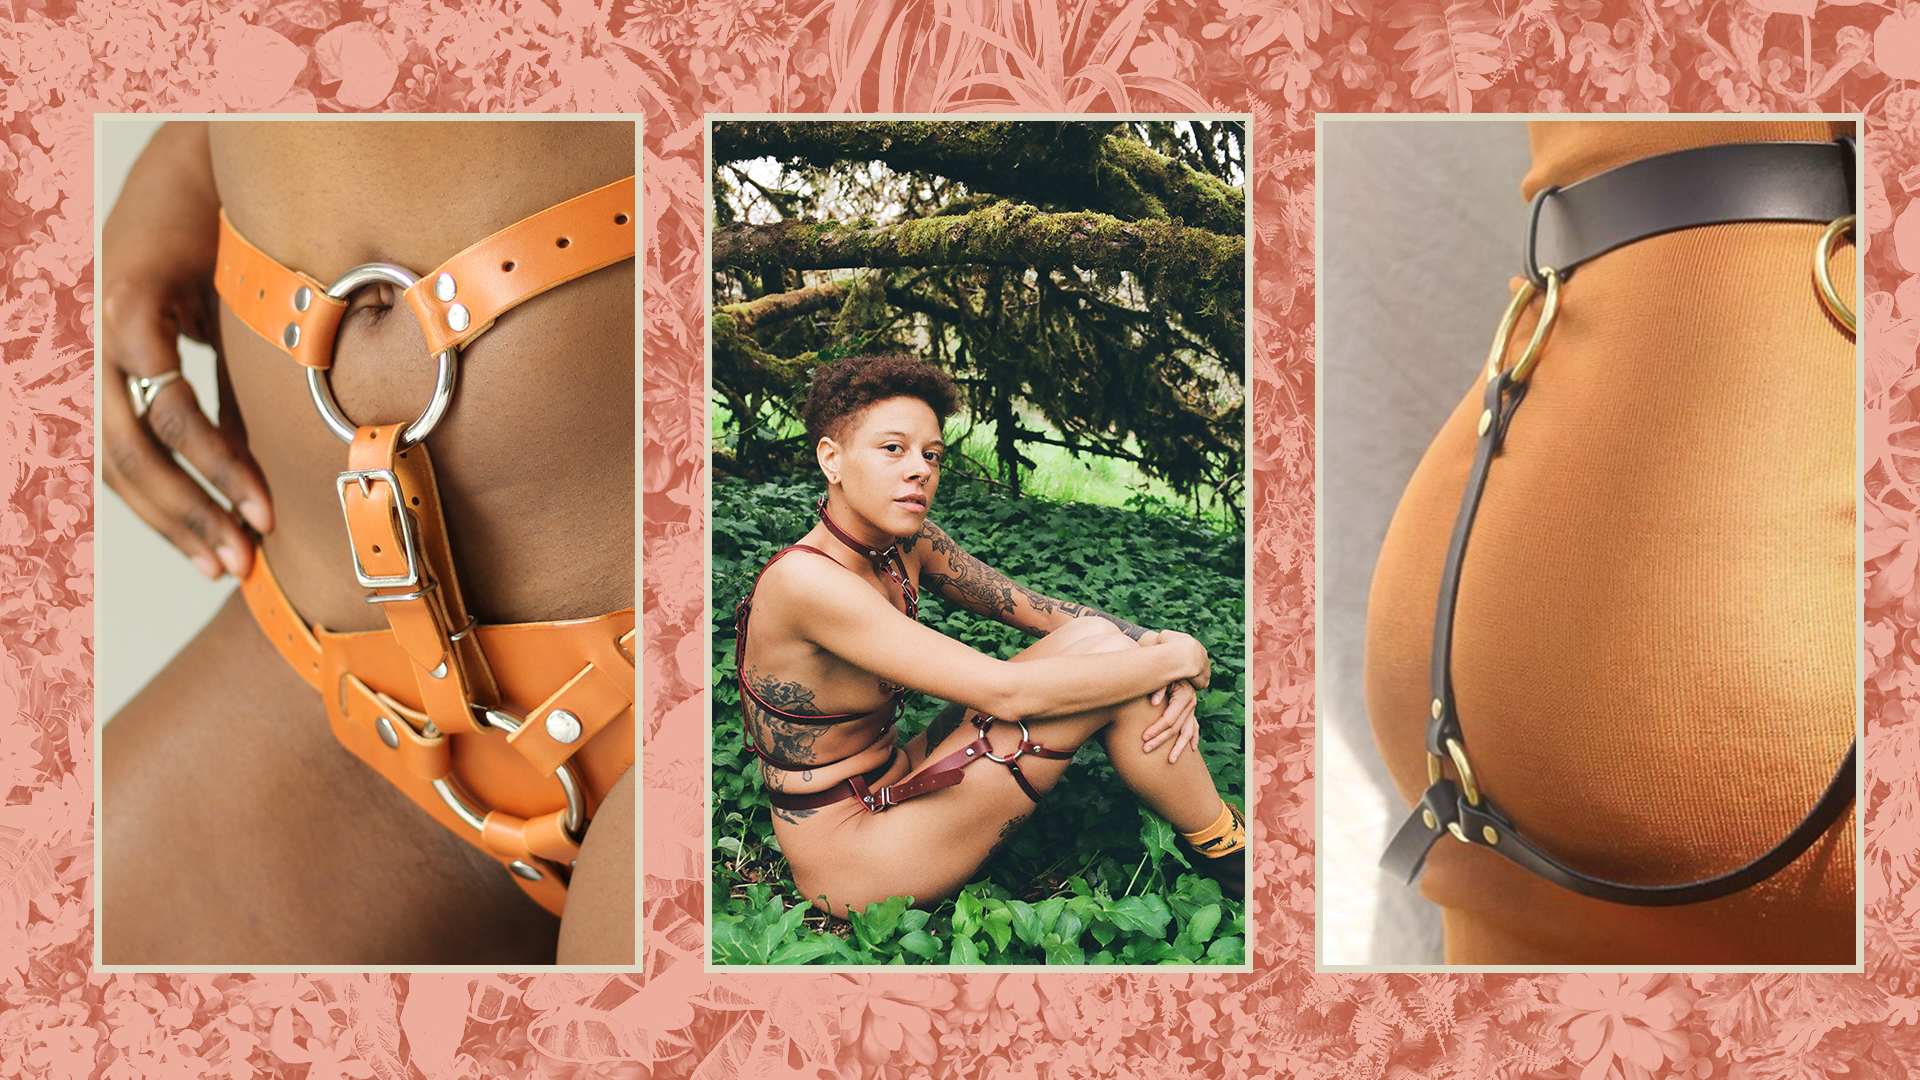 Strap-Ons Are Art for This Femme-Friendly DIY Leather Company